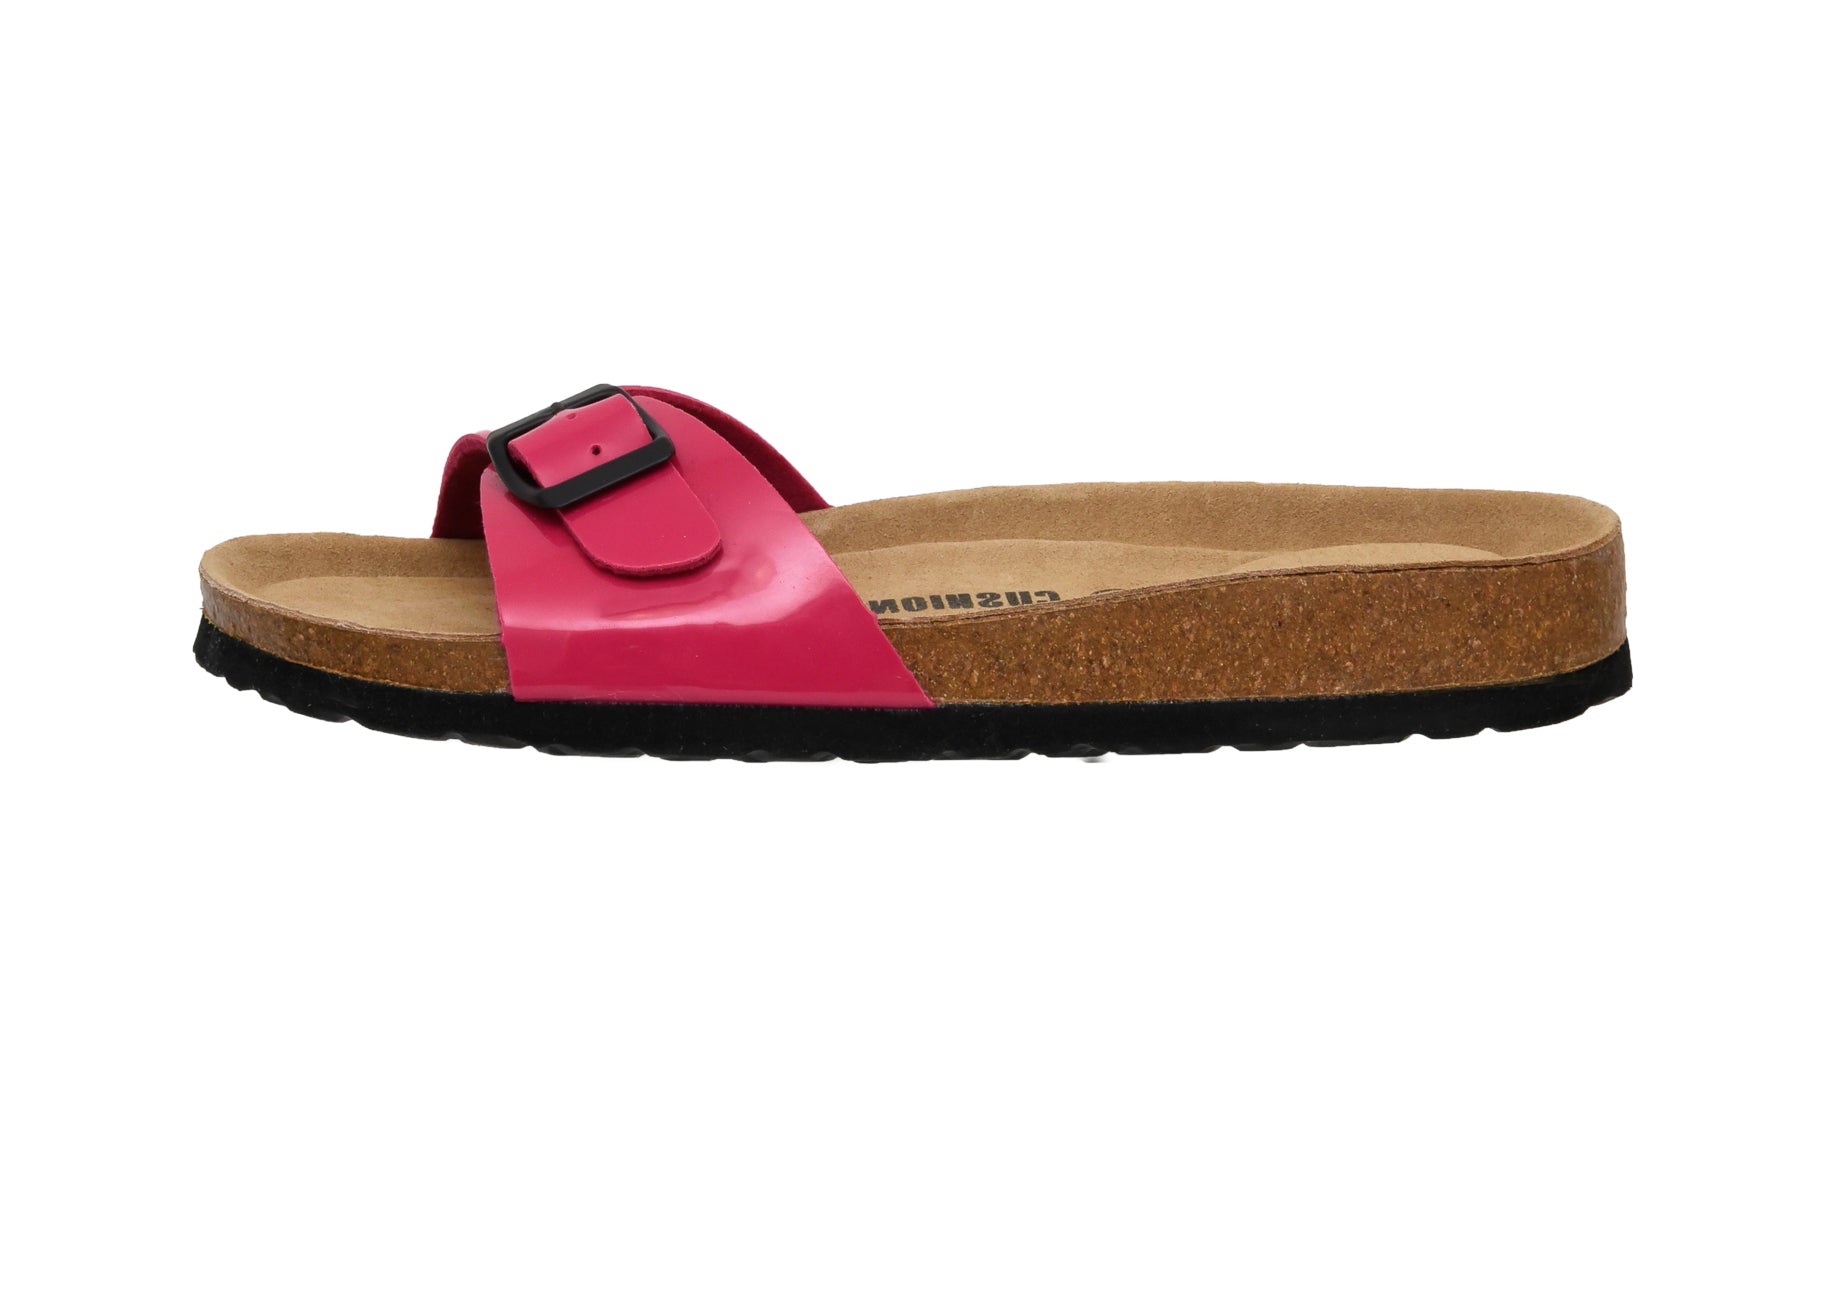 Luca One Band Cork Footbed Sandal Patents